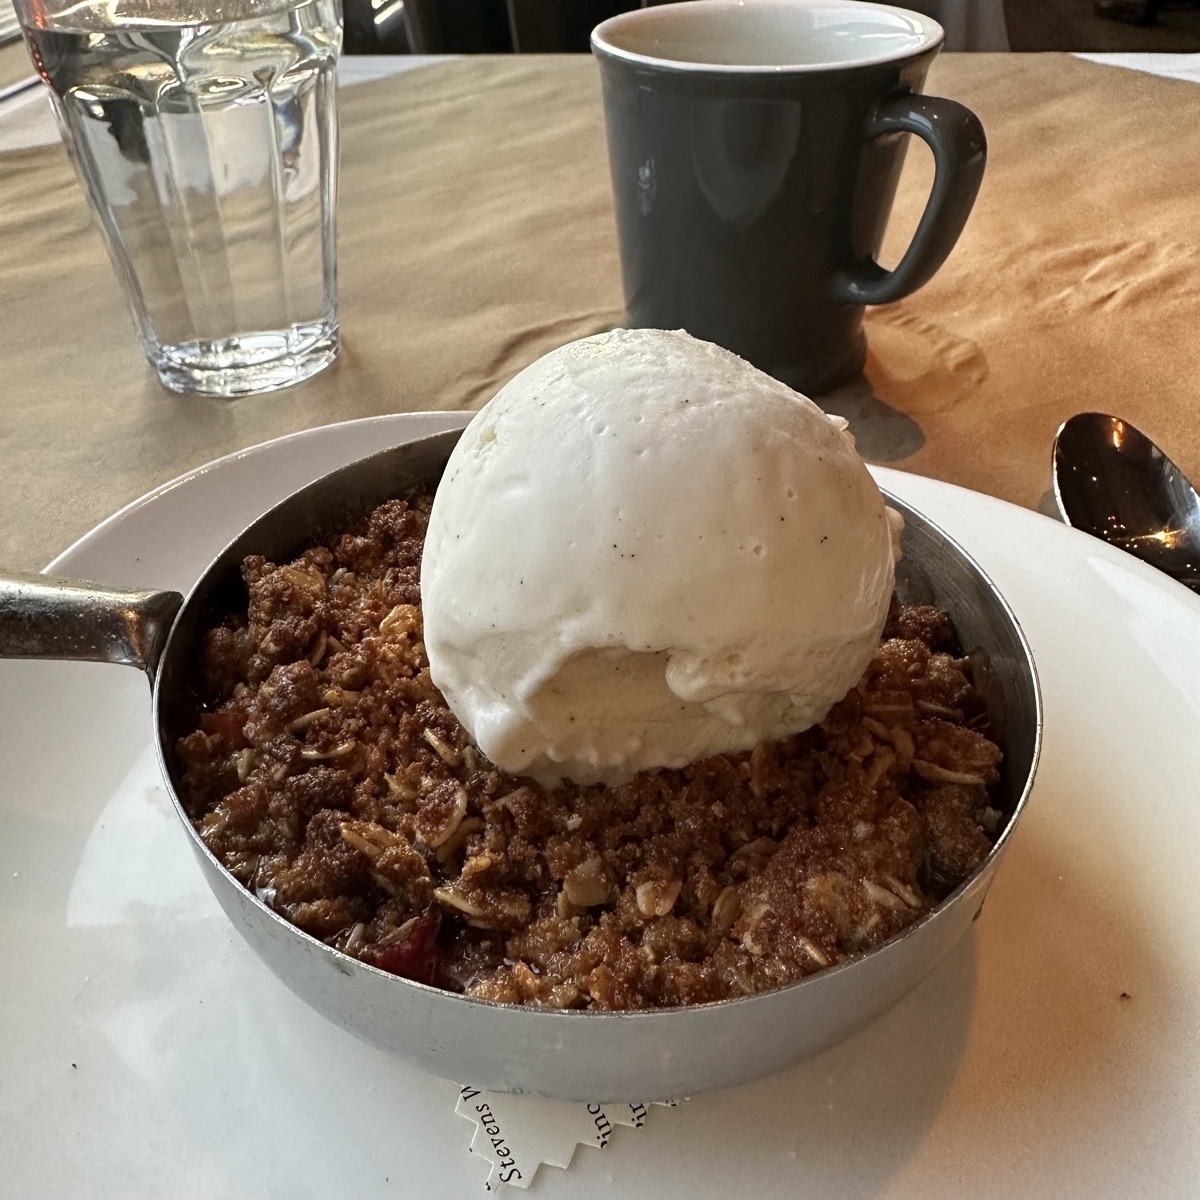 A large ball of ice cream atop a rhubarb crumble in a round aluminum bowl with a handle.